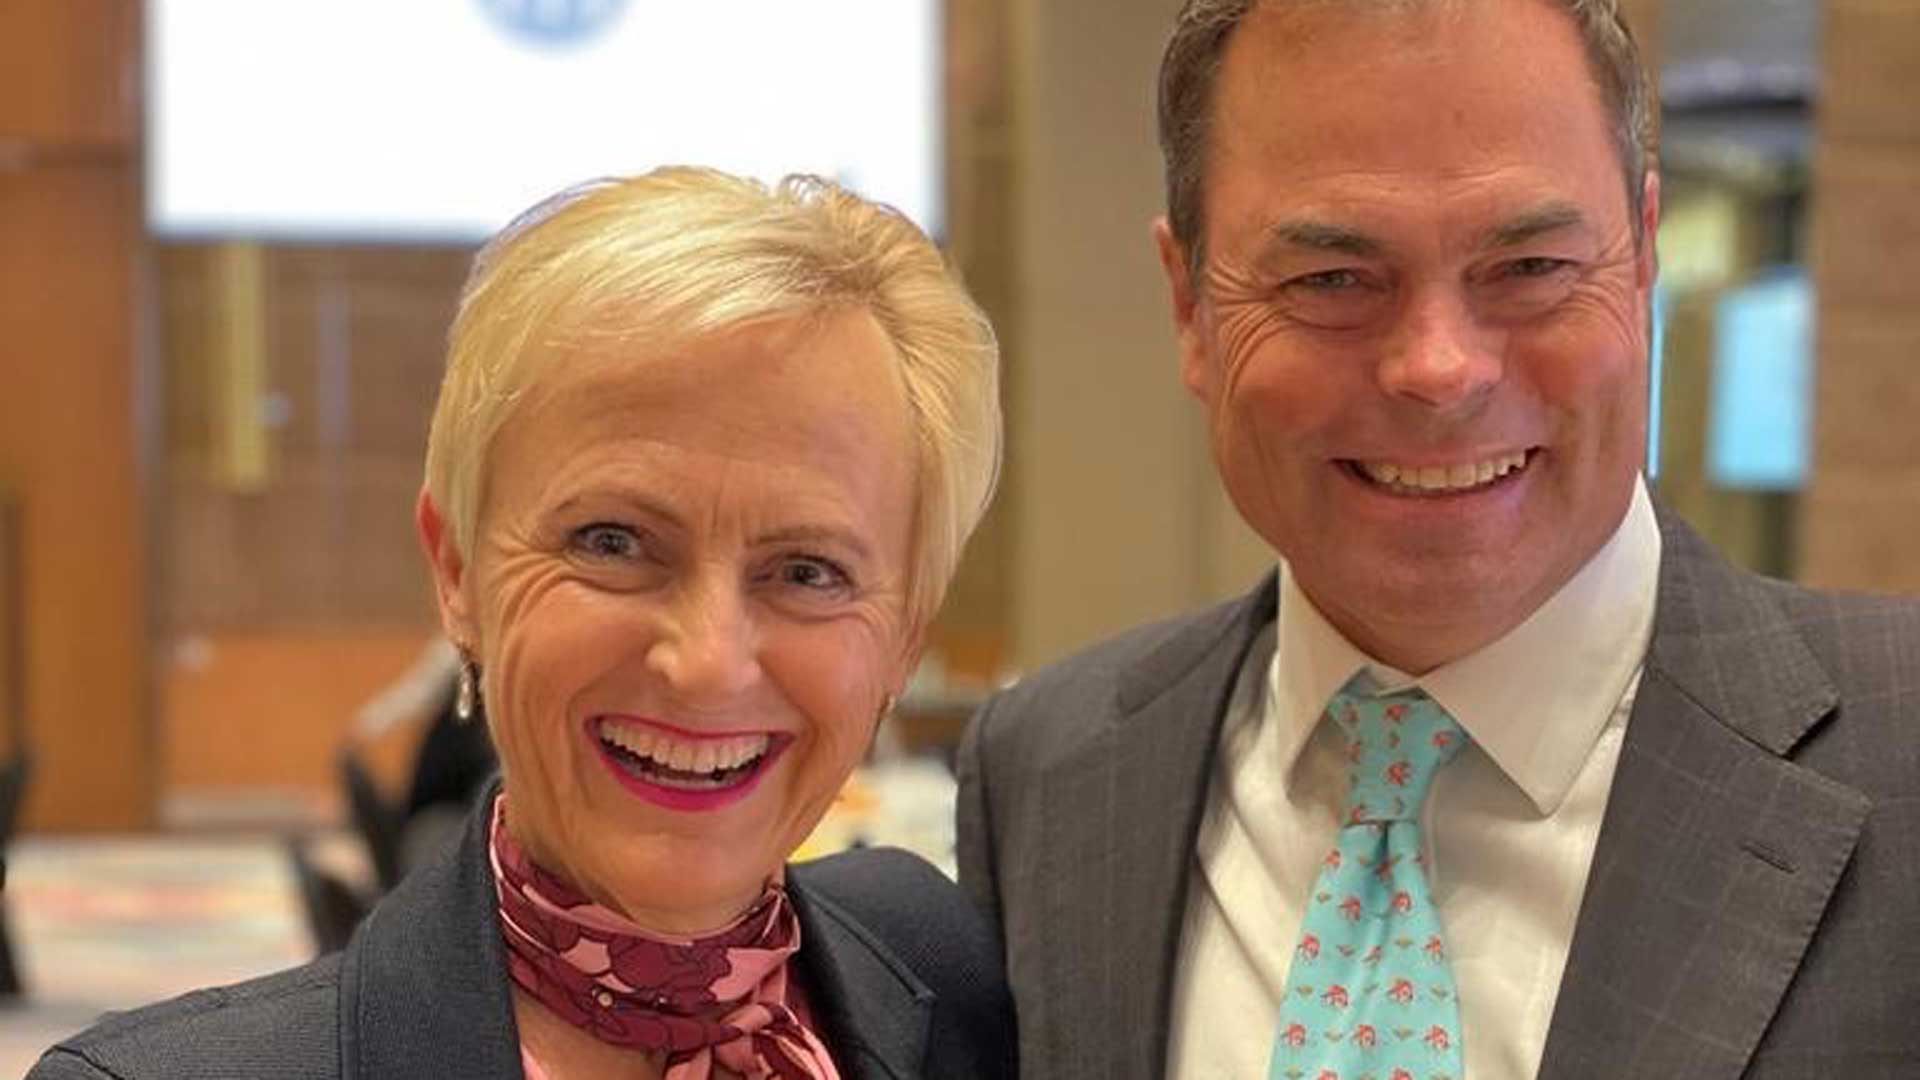 Photo of Katie and Malcolm Allen smiling. Katie has short blond hair and is wearing a grey blazer and burgundy and pink floral scarf. Malcolm is wearing a grey blazer and turquoise tie with a white shirt.